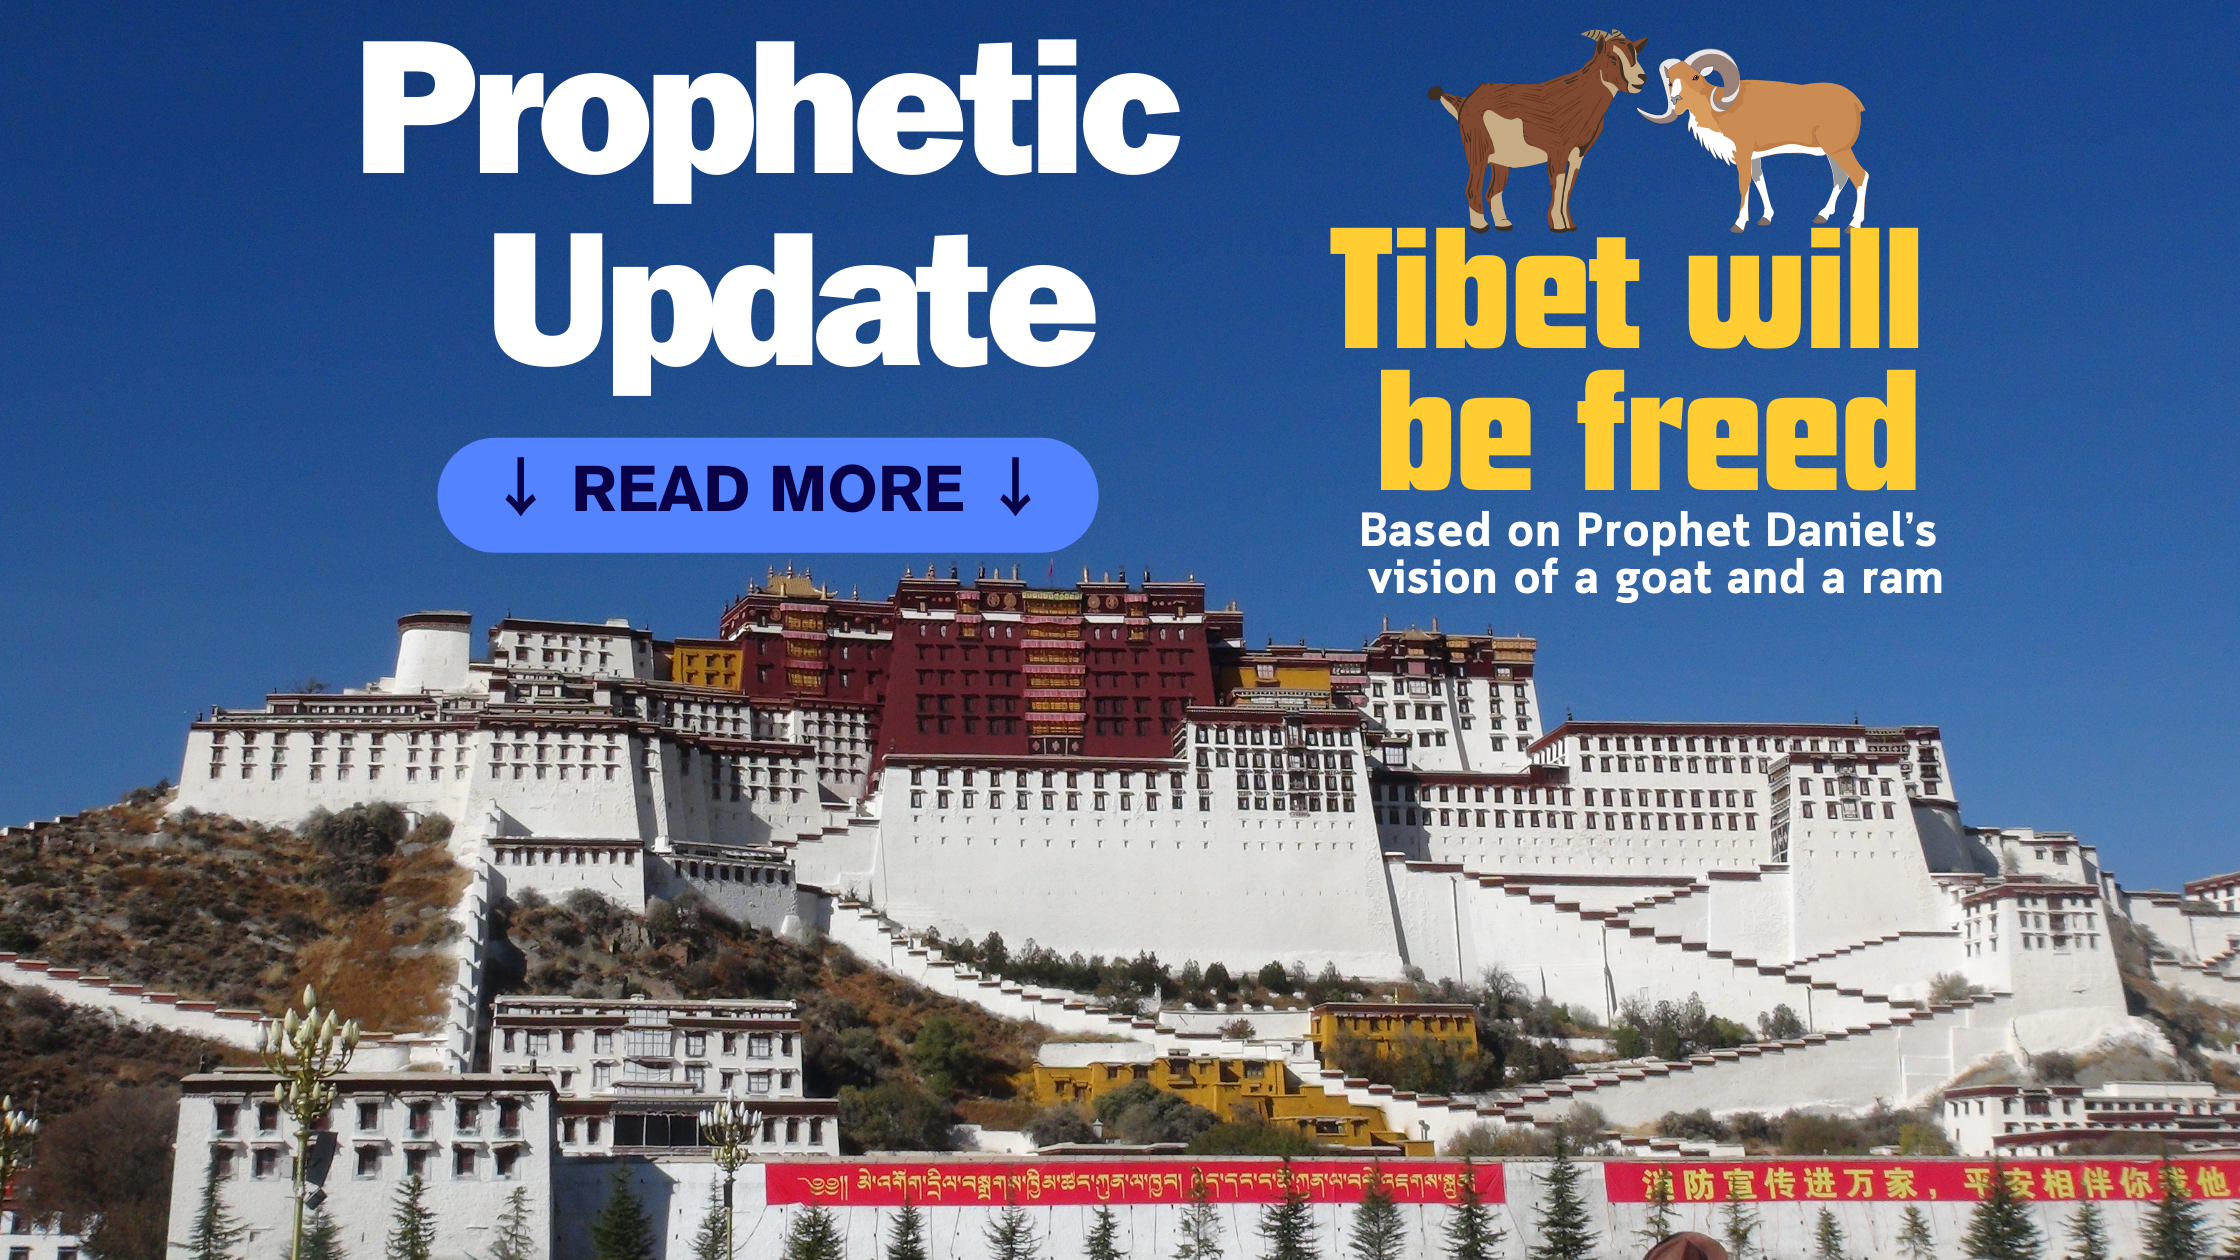 tibet will be freed